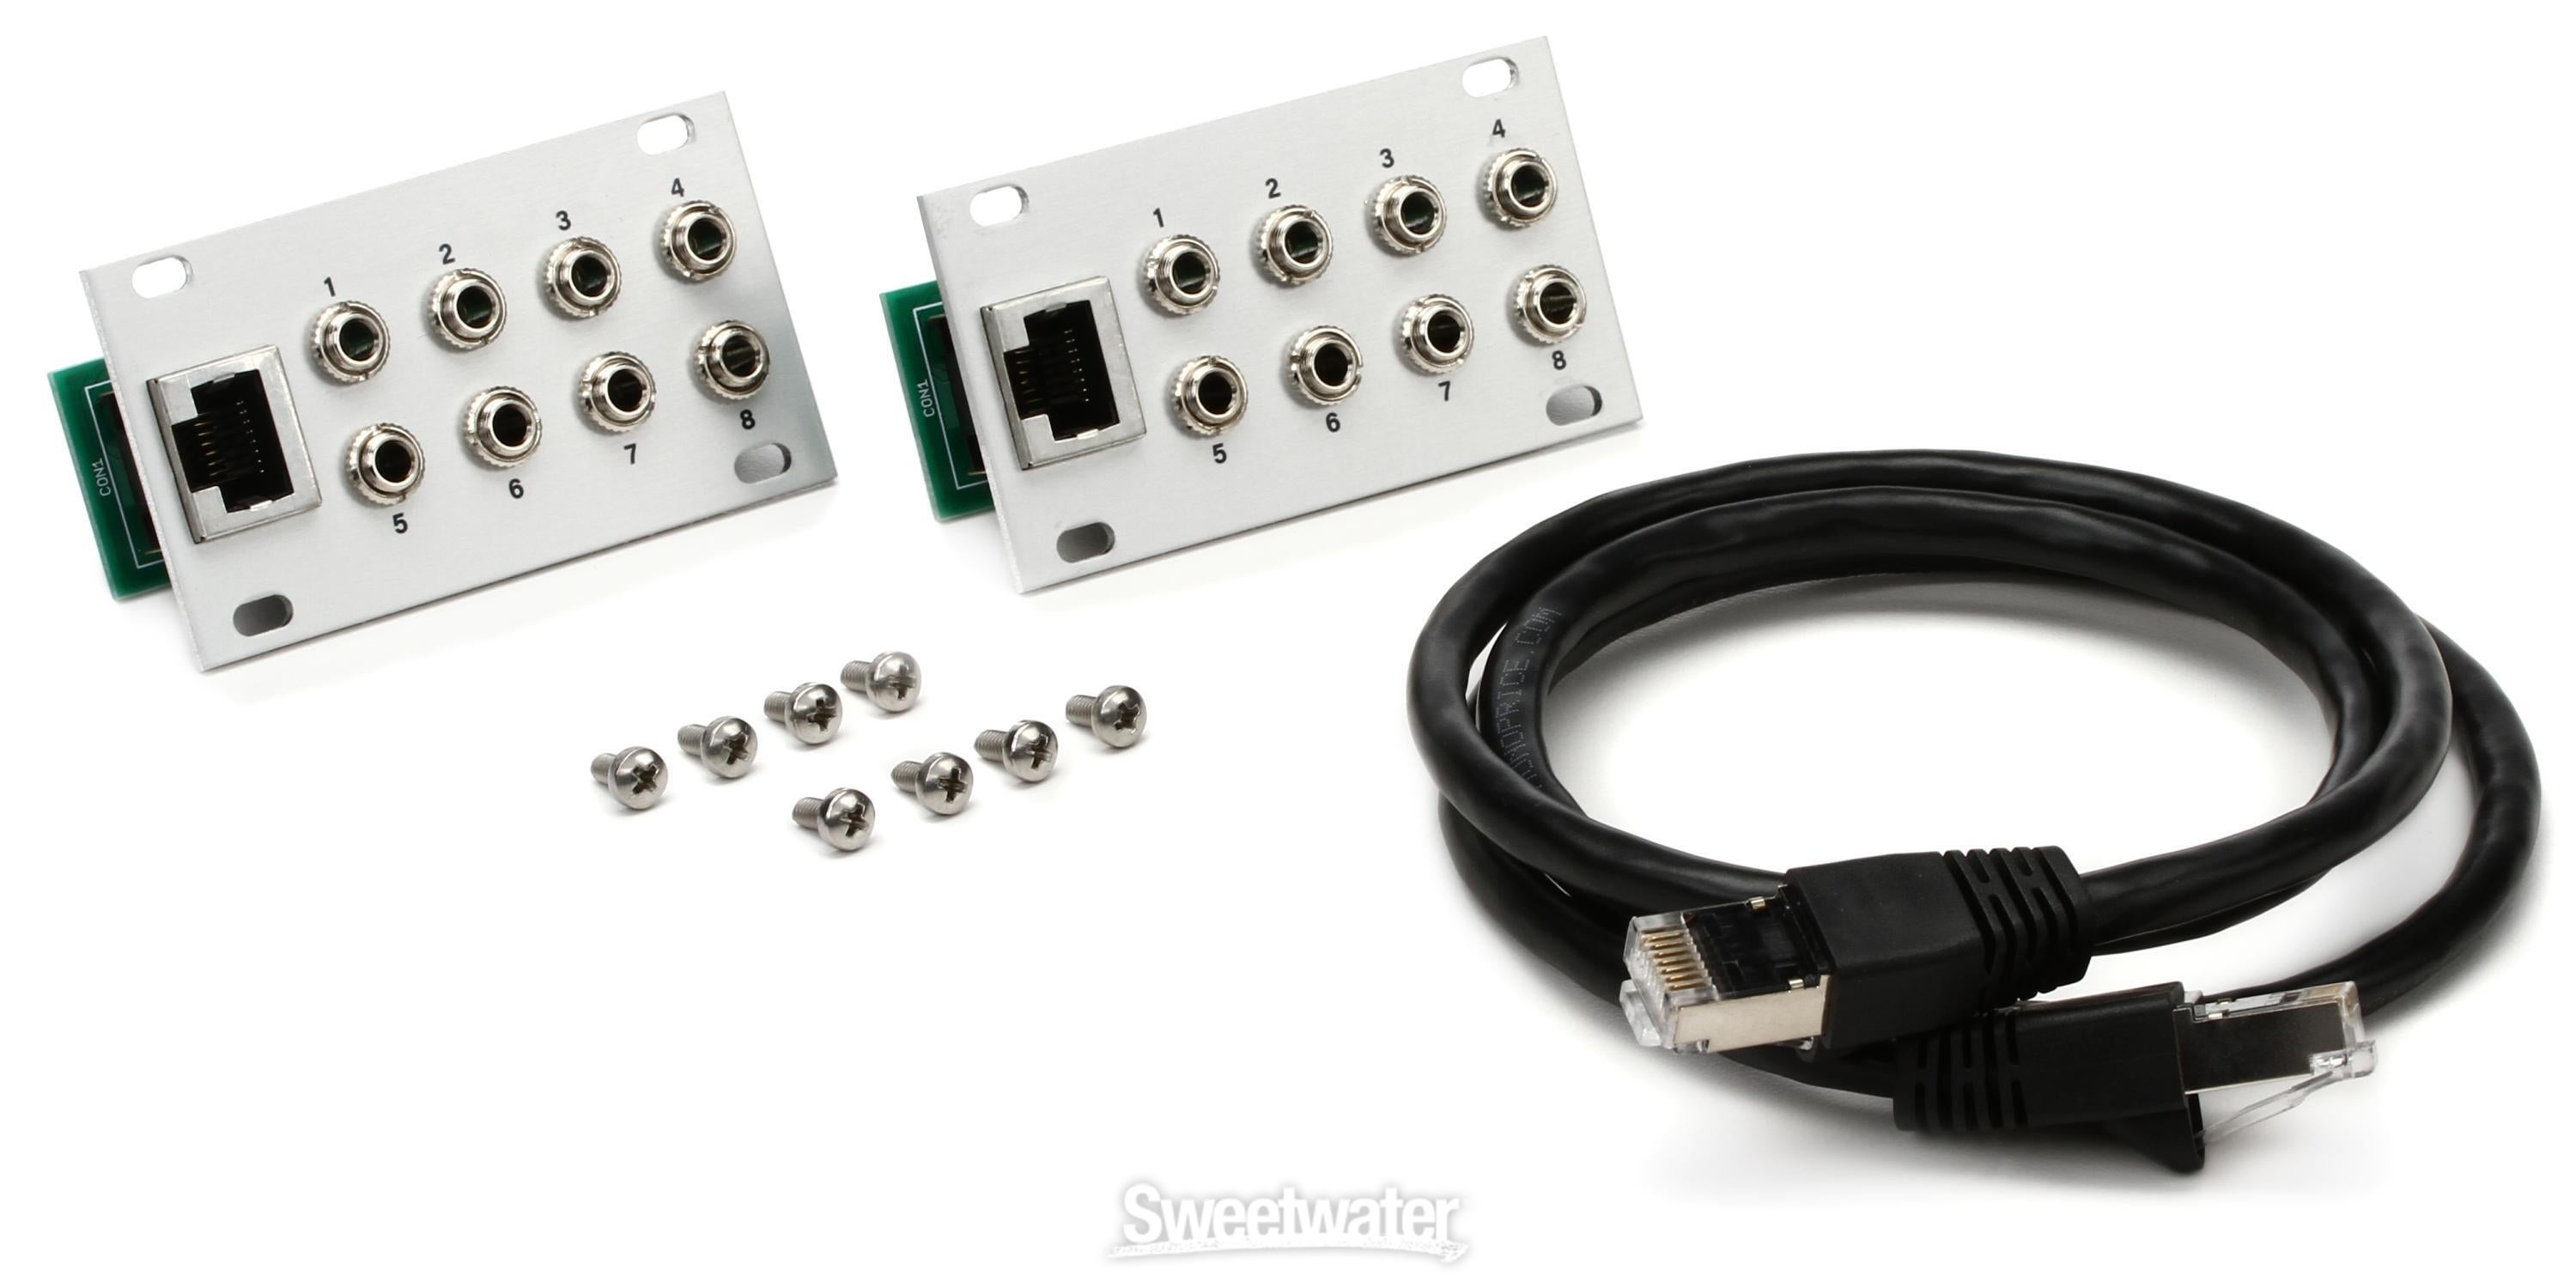 Intellijel Octalink-1U Pair of Modules with cable | Sweetwater